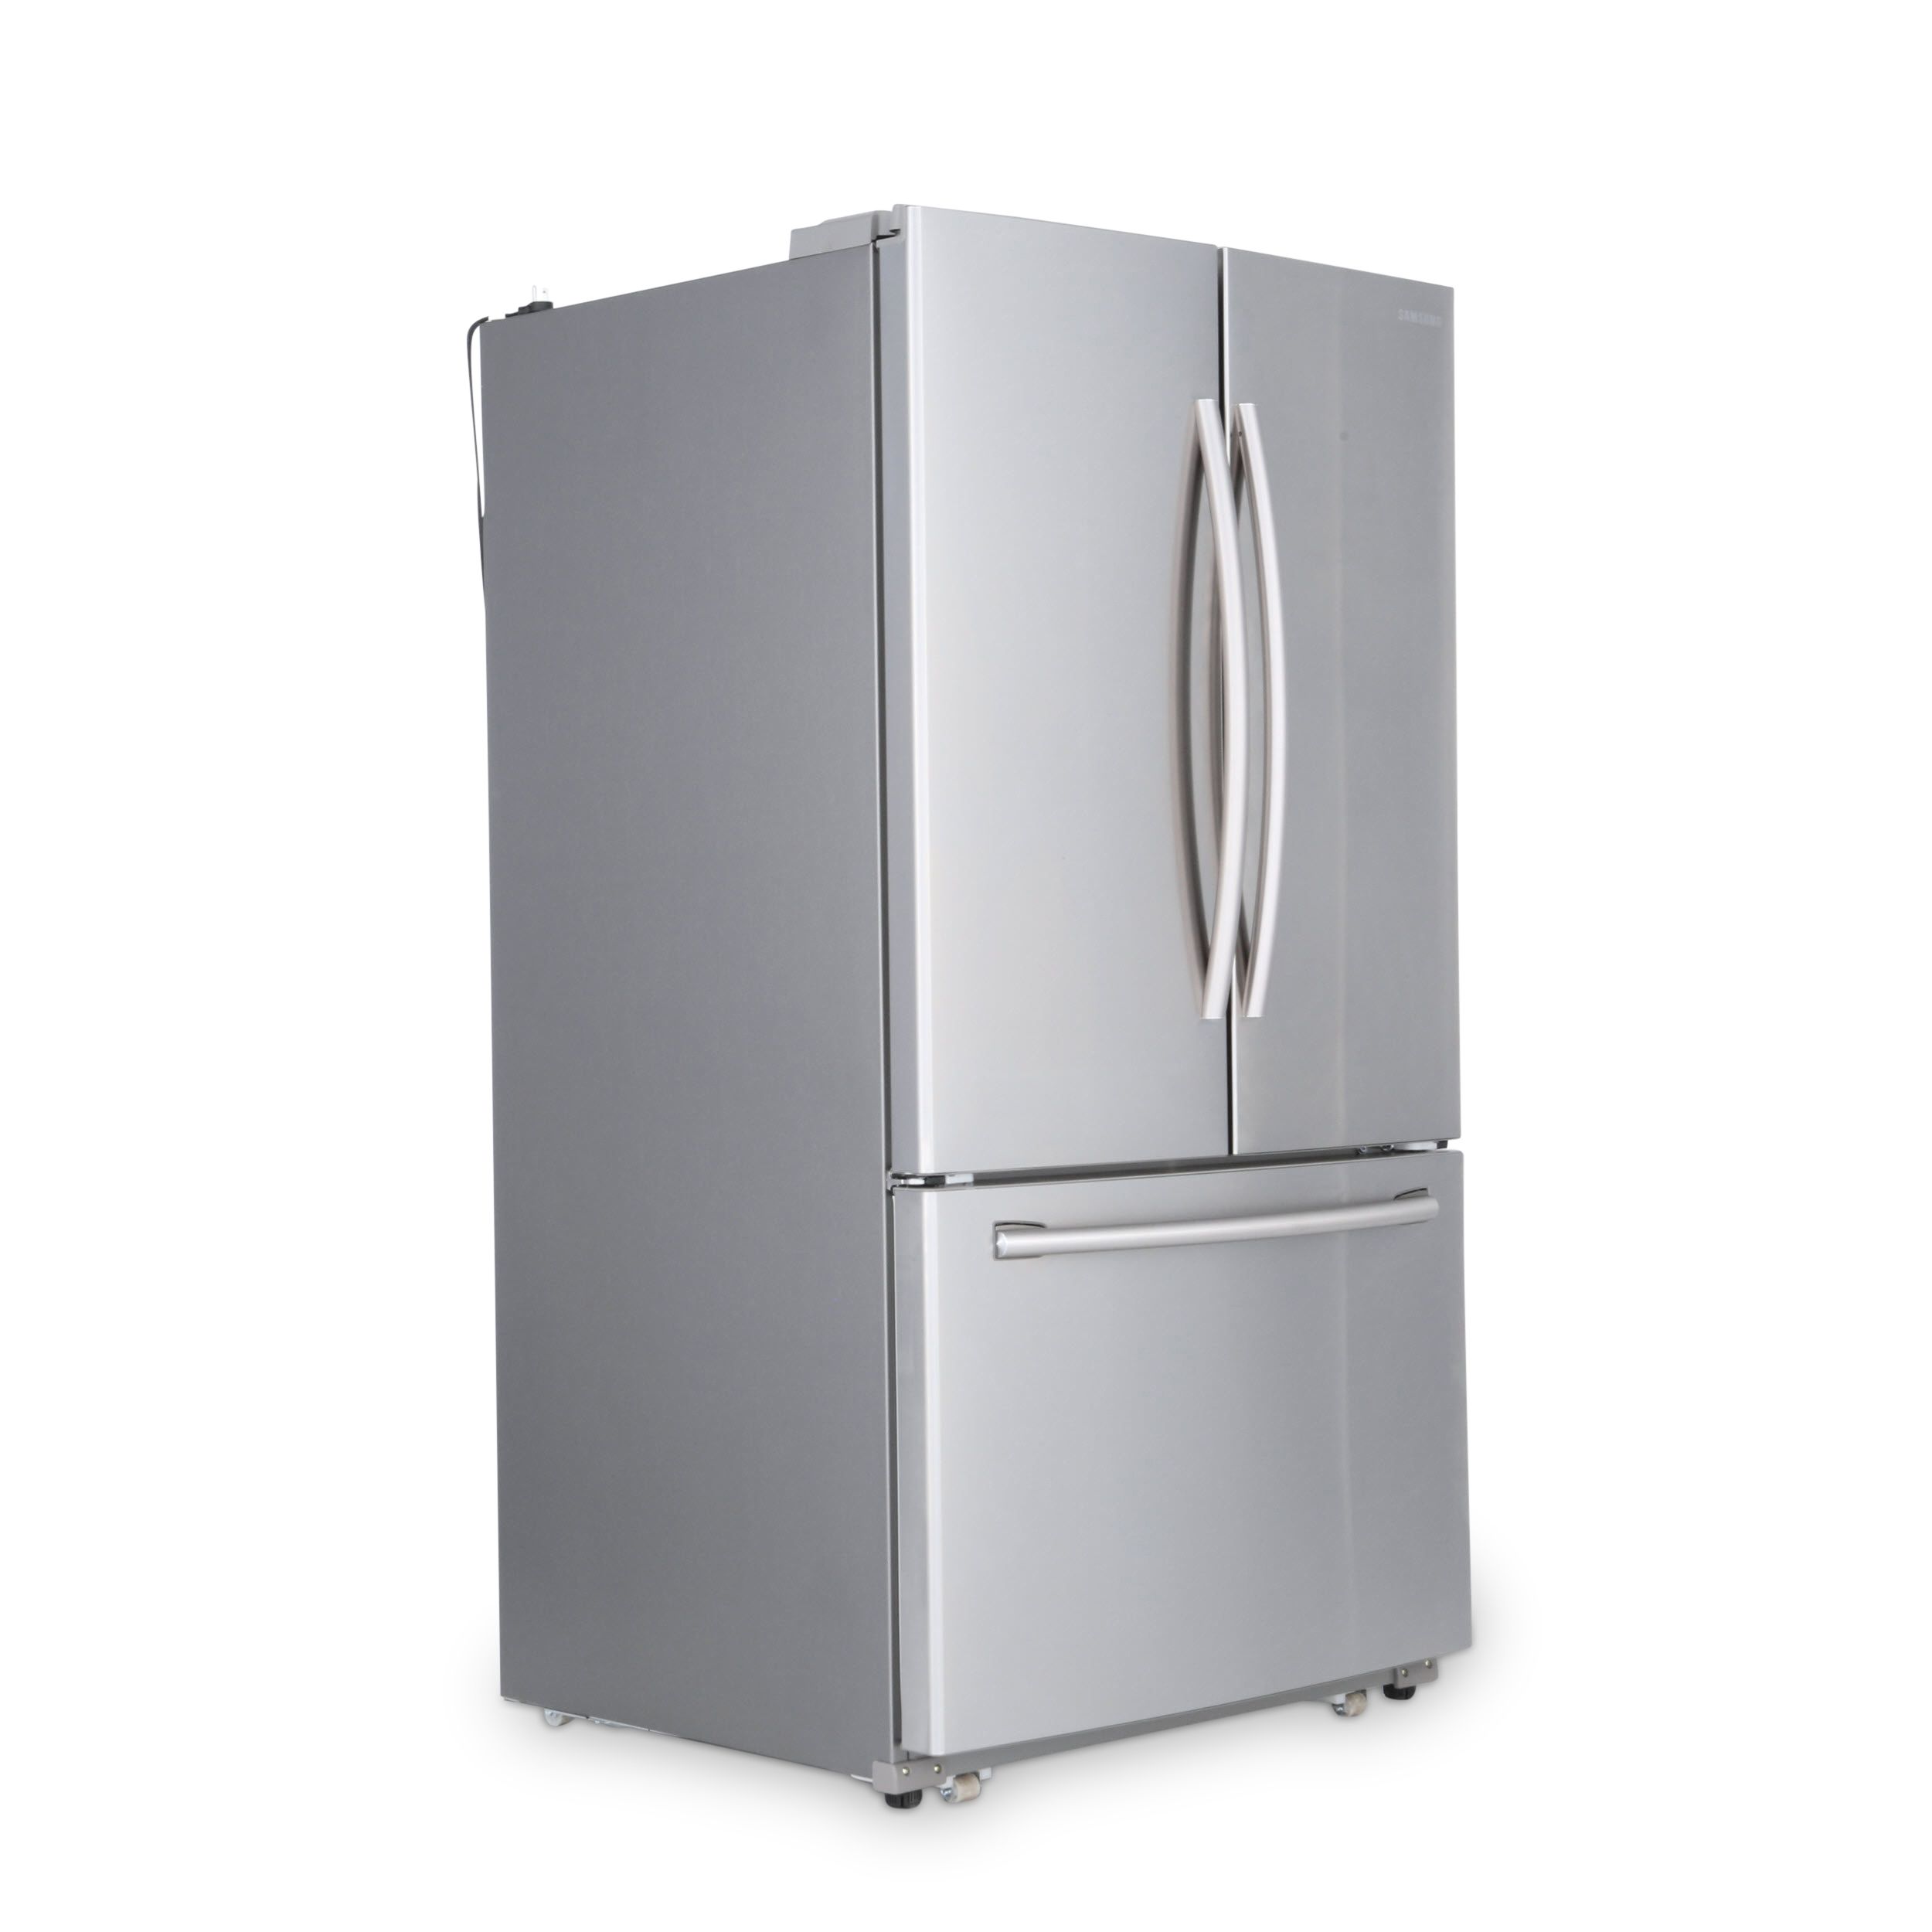 Samsung 25.5-cu ft French Door Refrigerator with Ice Maker 